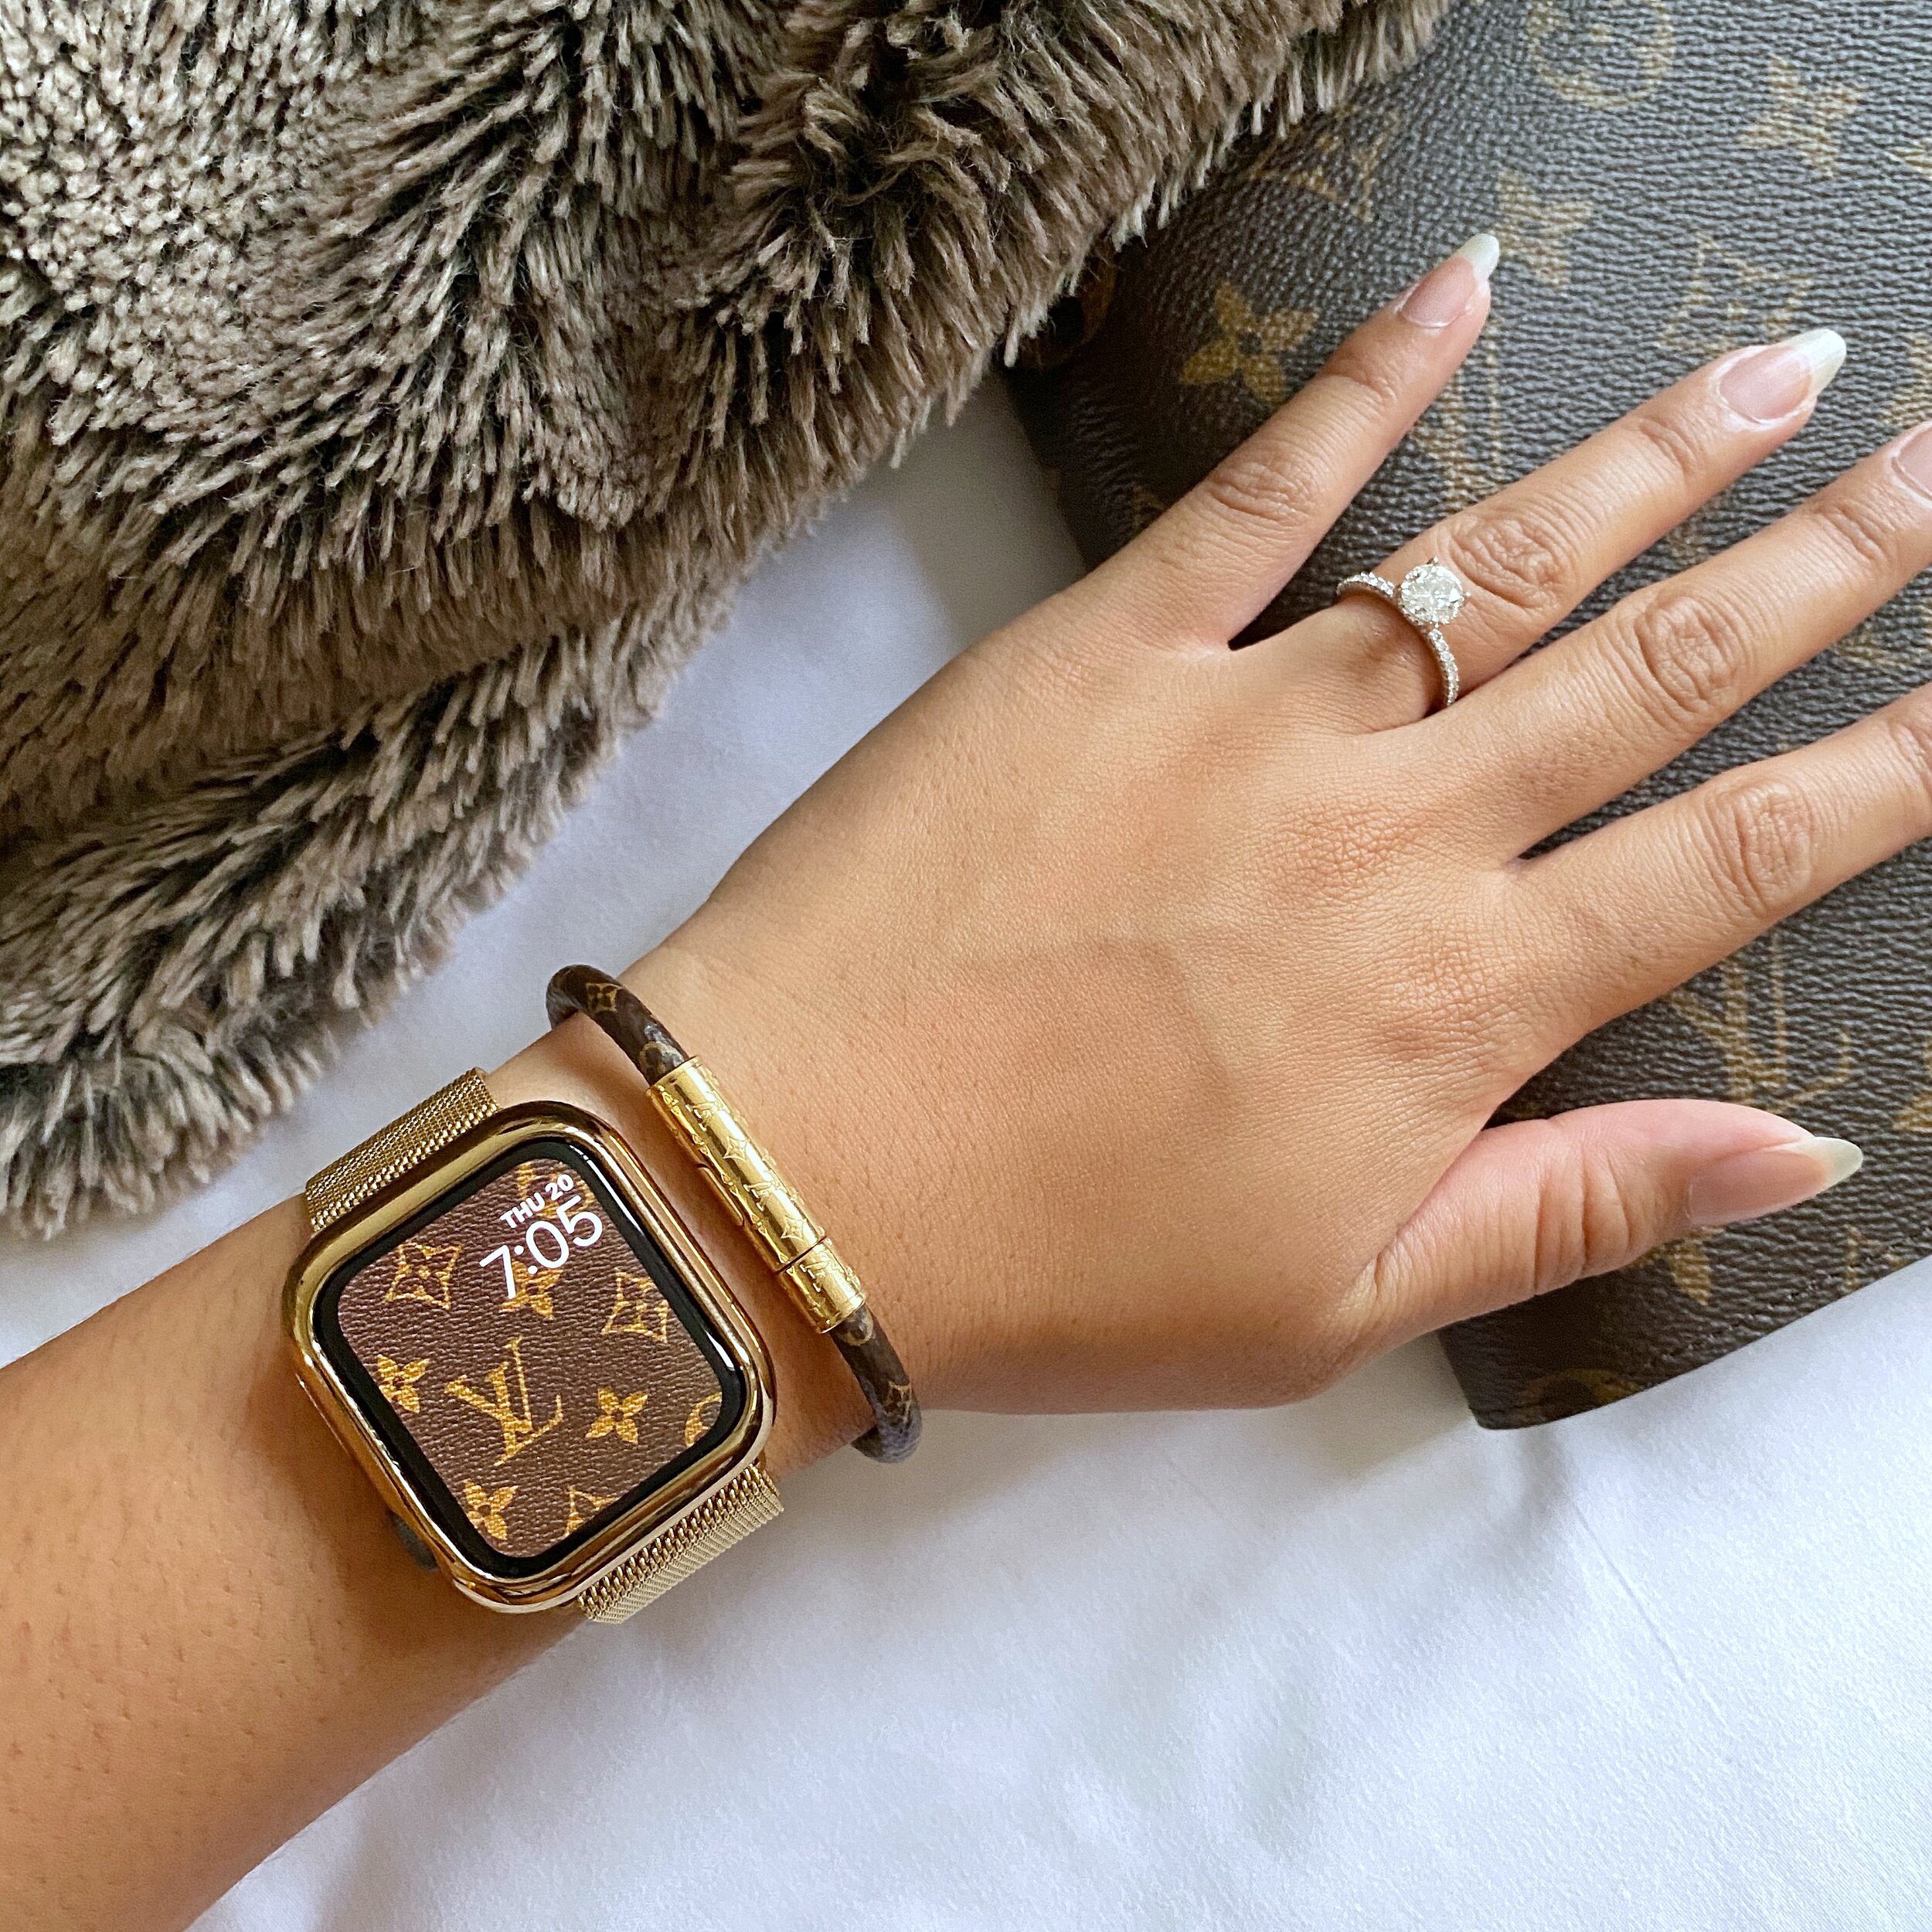 iphone watch bands for women 44mm lv